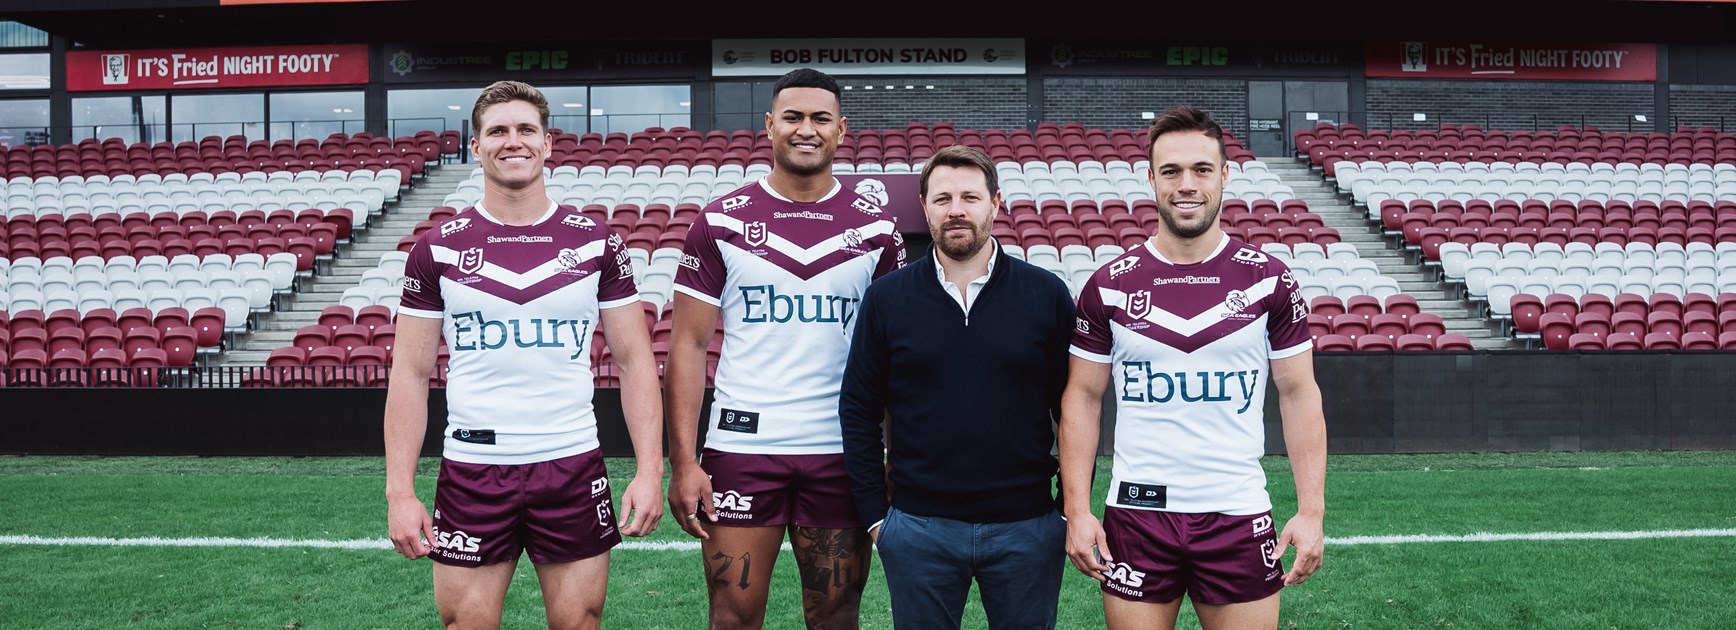 Sea Eagles welcome Ebury as jersey sponsor for Warriors game